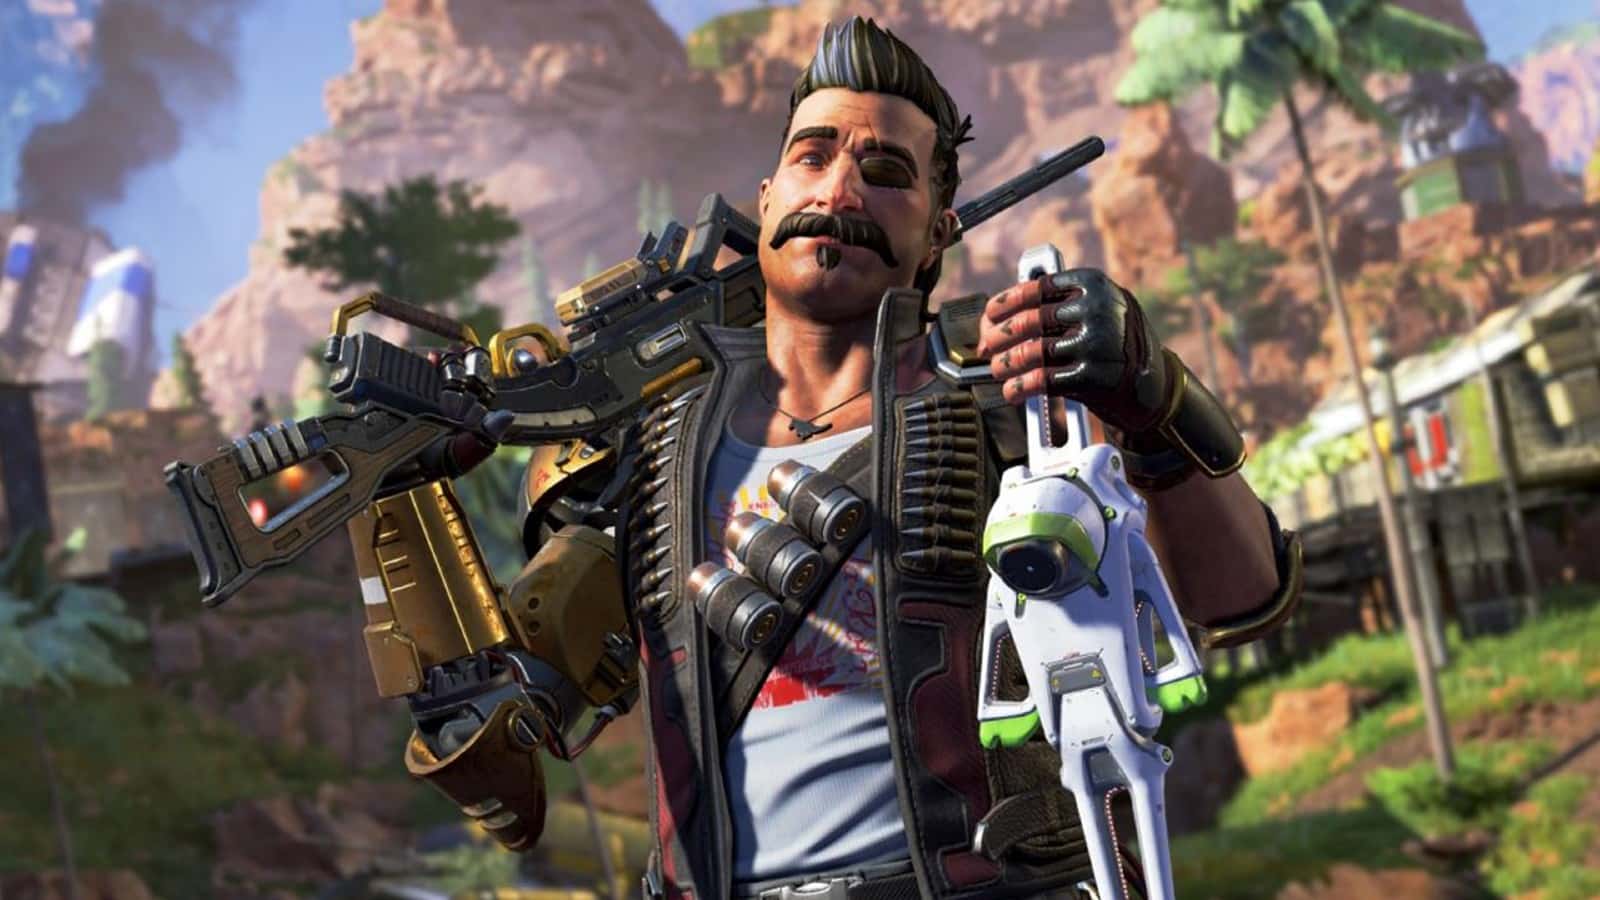 Fuse, the Explosives Enthusiast, in Apex Legends